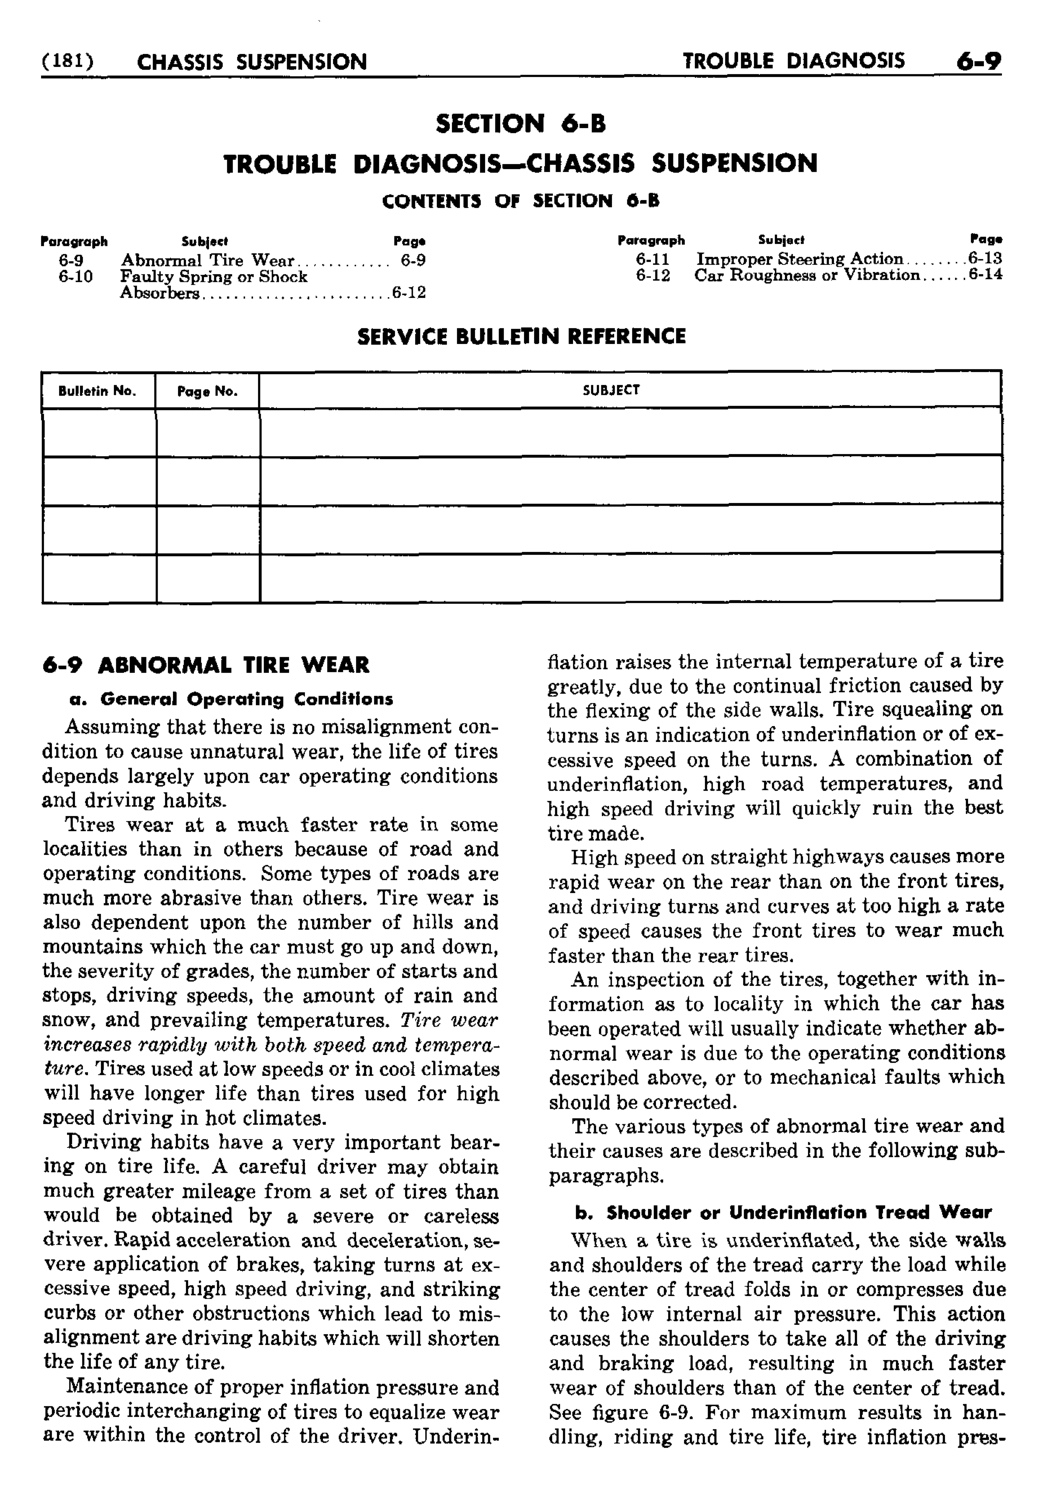 n_07 1950 Buick Shop Manual - Chassis Suspension-009-009.jpg